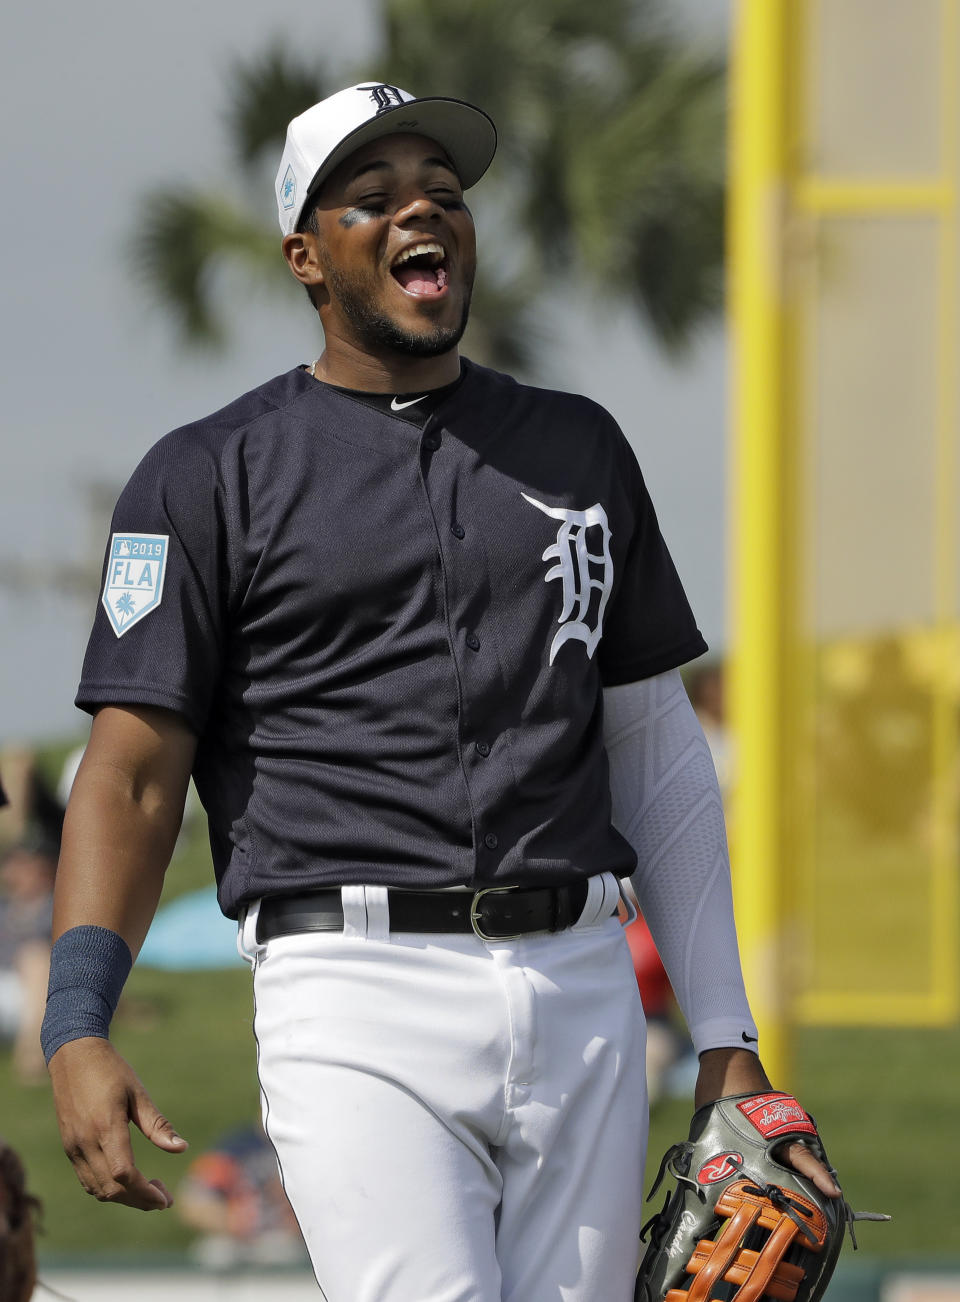 Detroit Tigers third baseman Jeimer Candelario laughs as he talks to first baseman Miguel Cabrera during the fourth inning of a spring training baseball game against the St. Louis Cardinals Monday, March 4, 2019, in Lakeland, Fla. (AP Photo/Chris O'Meara)